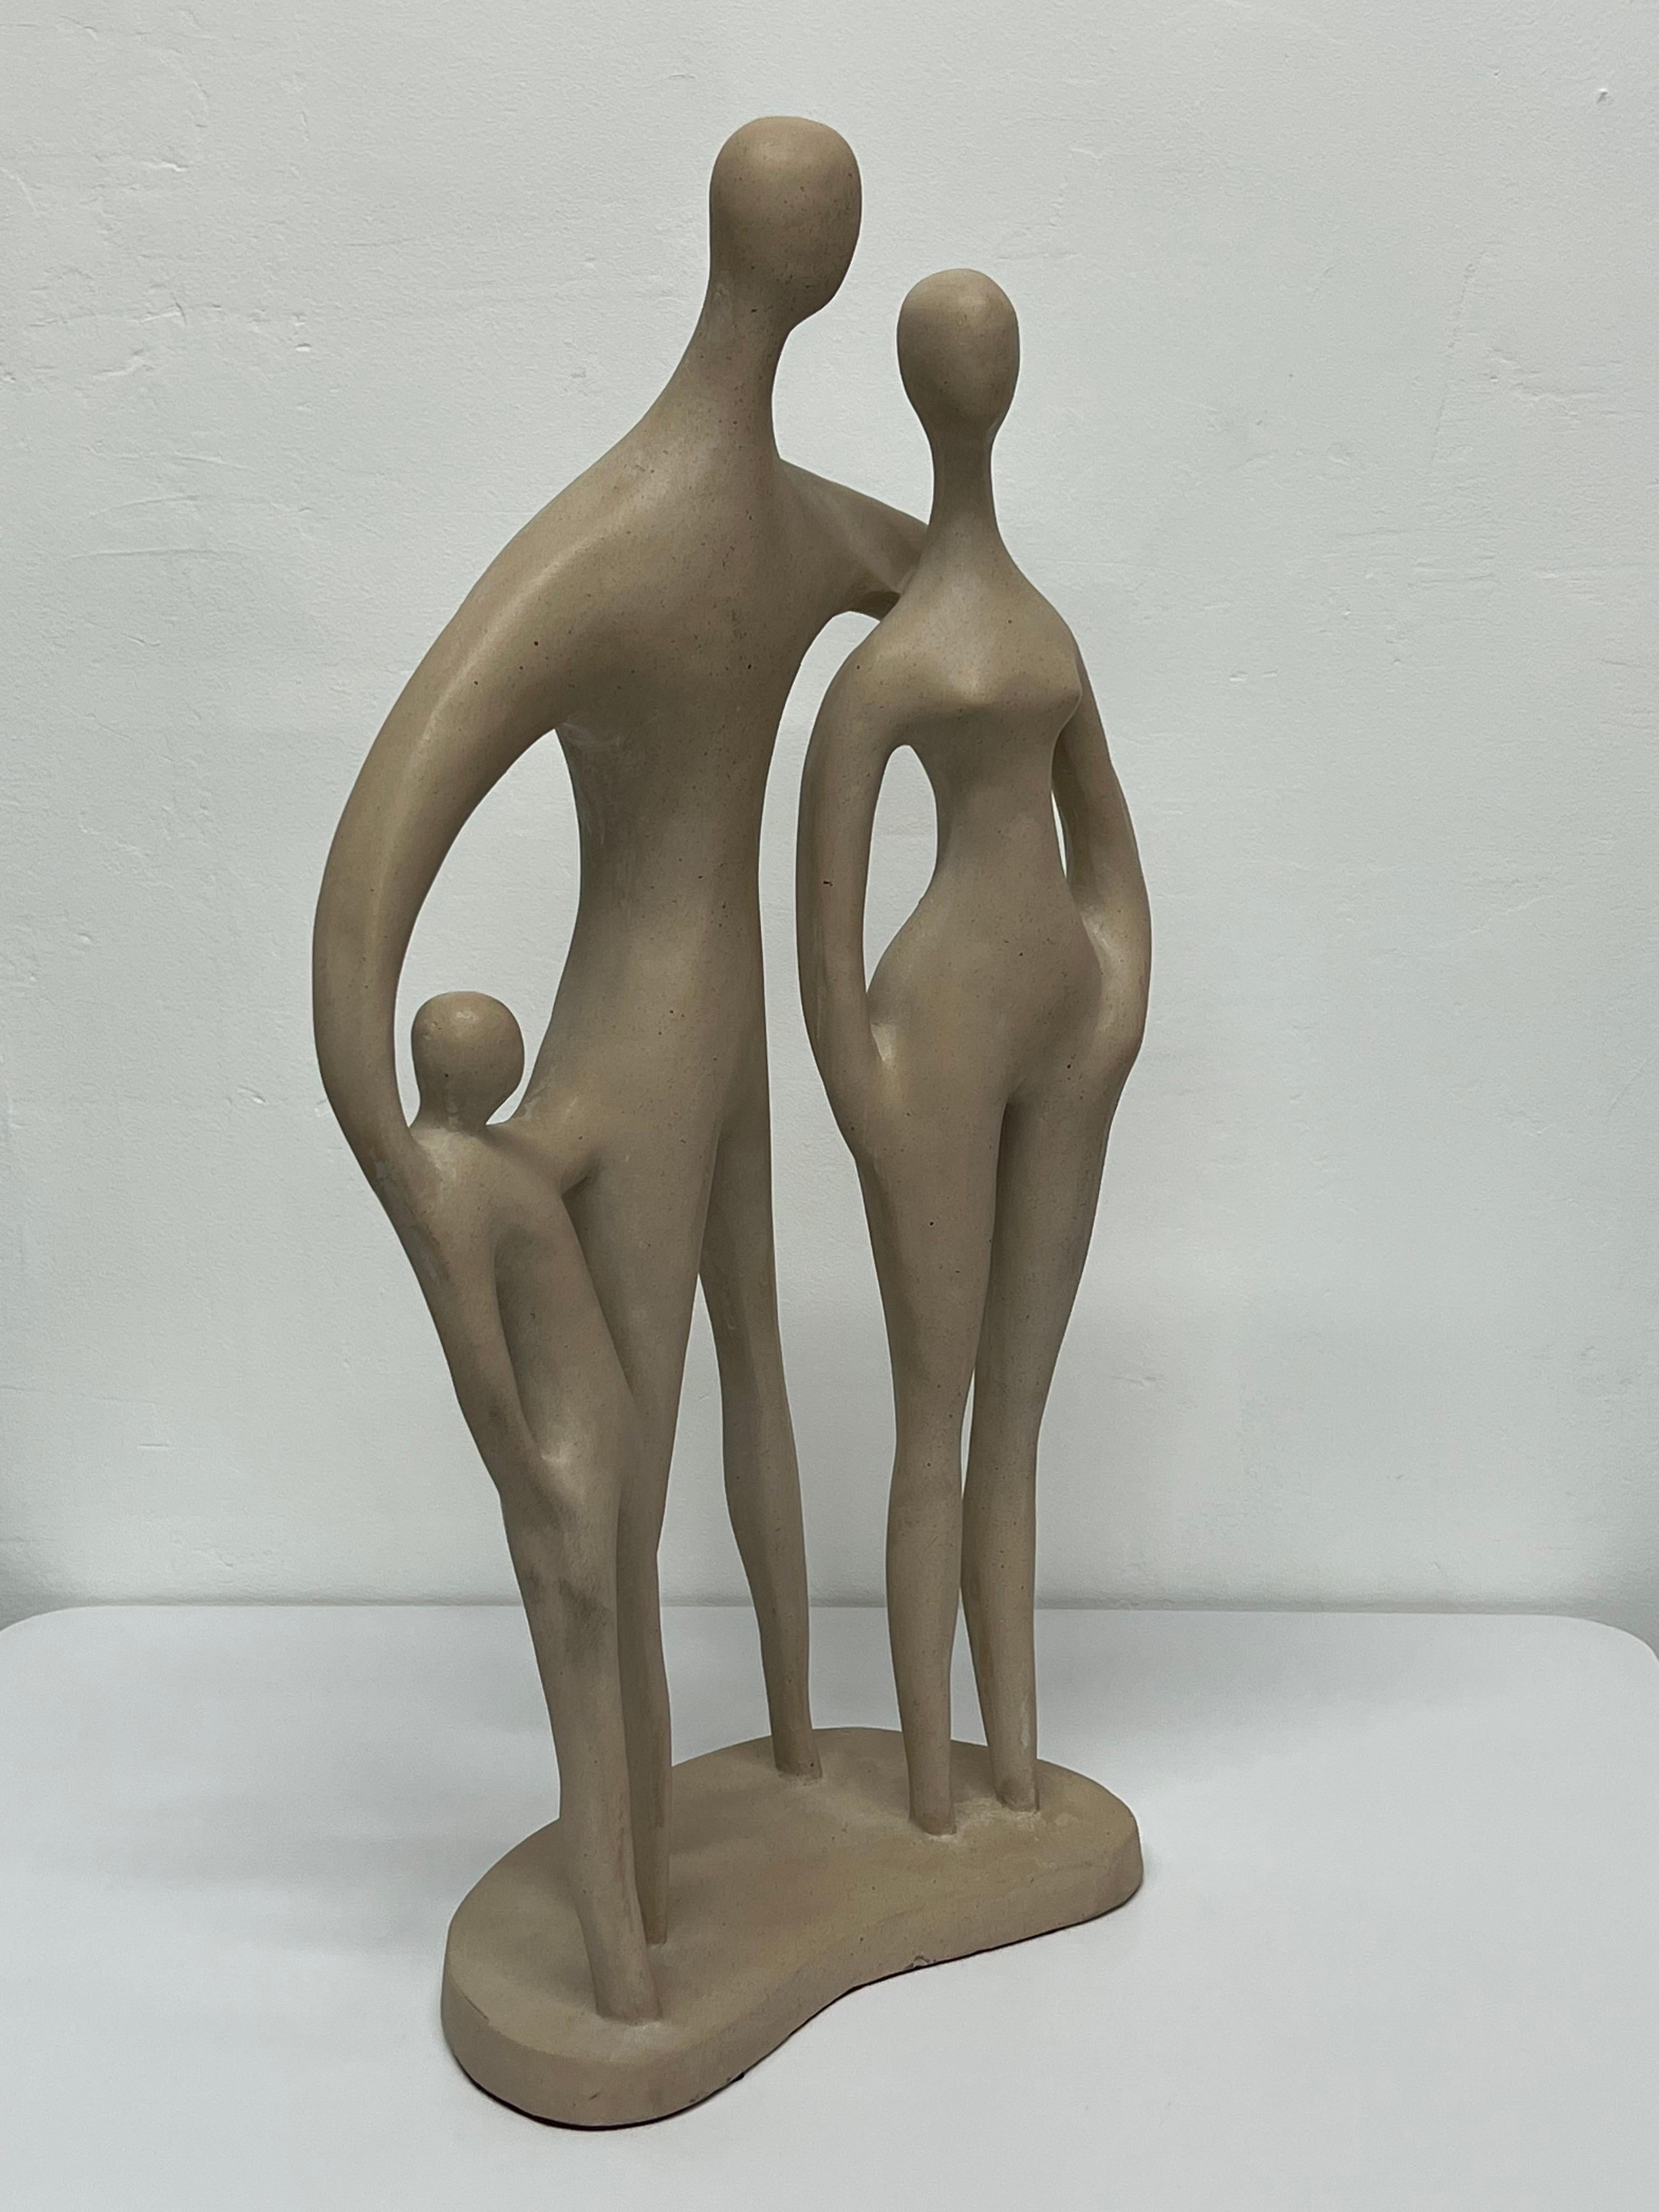 Modernist sculpture of Man, Woman and Child by Austin Productions, 1979.